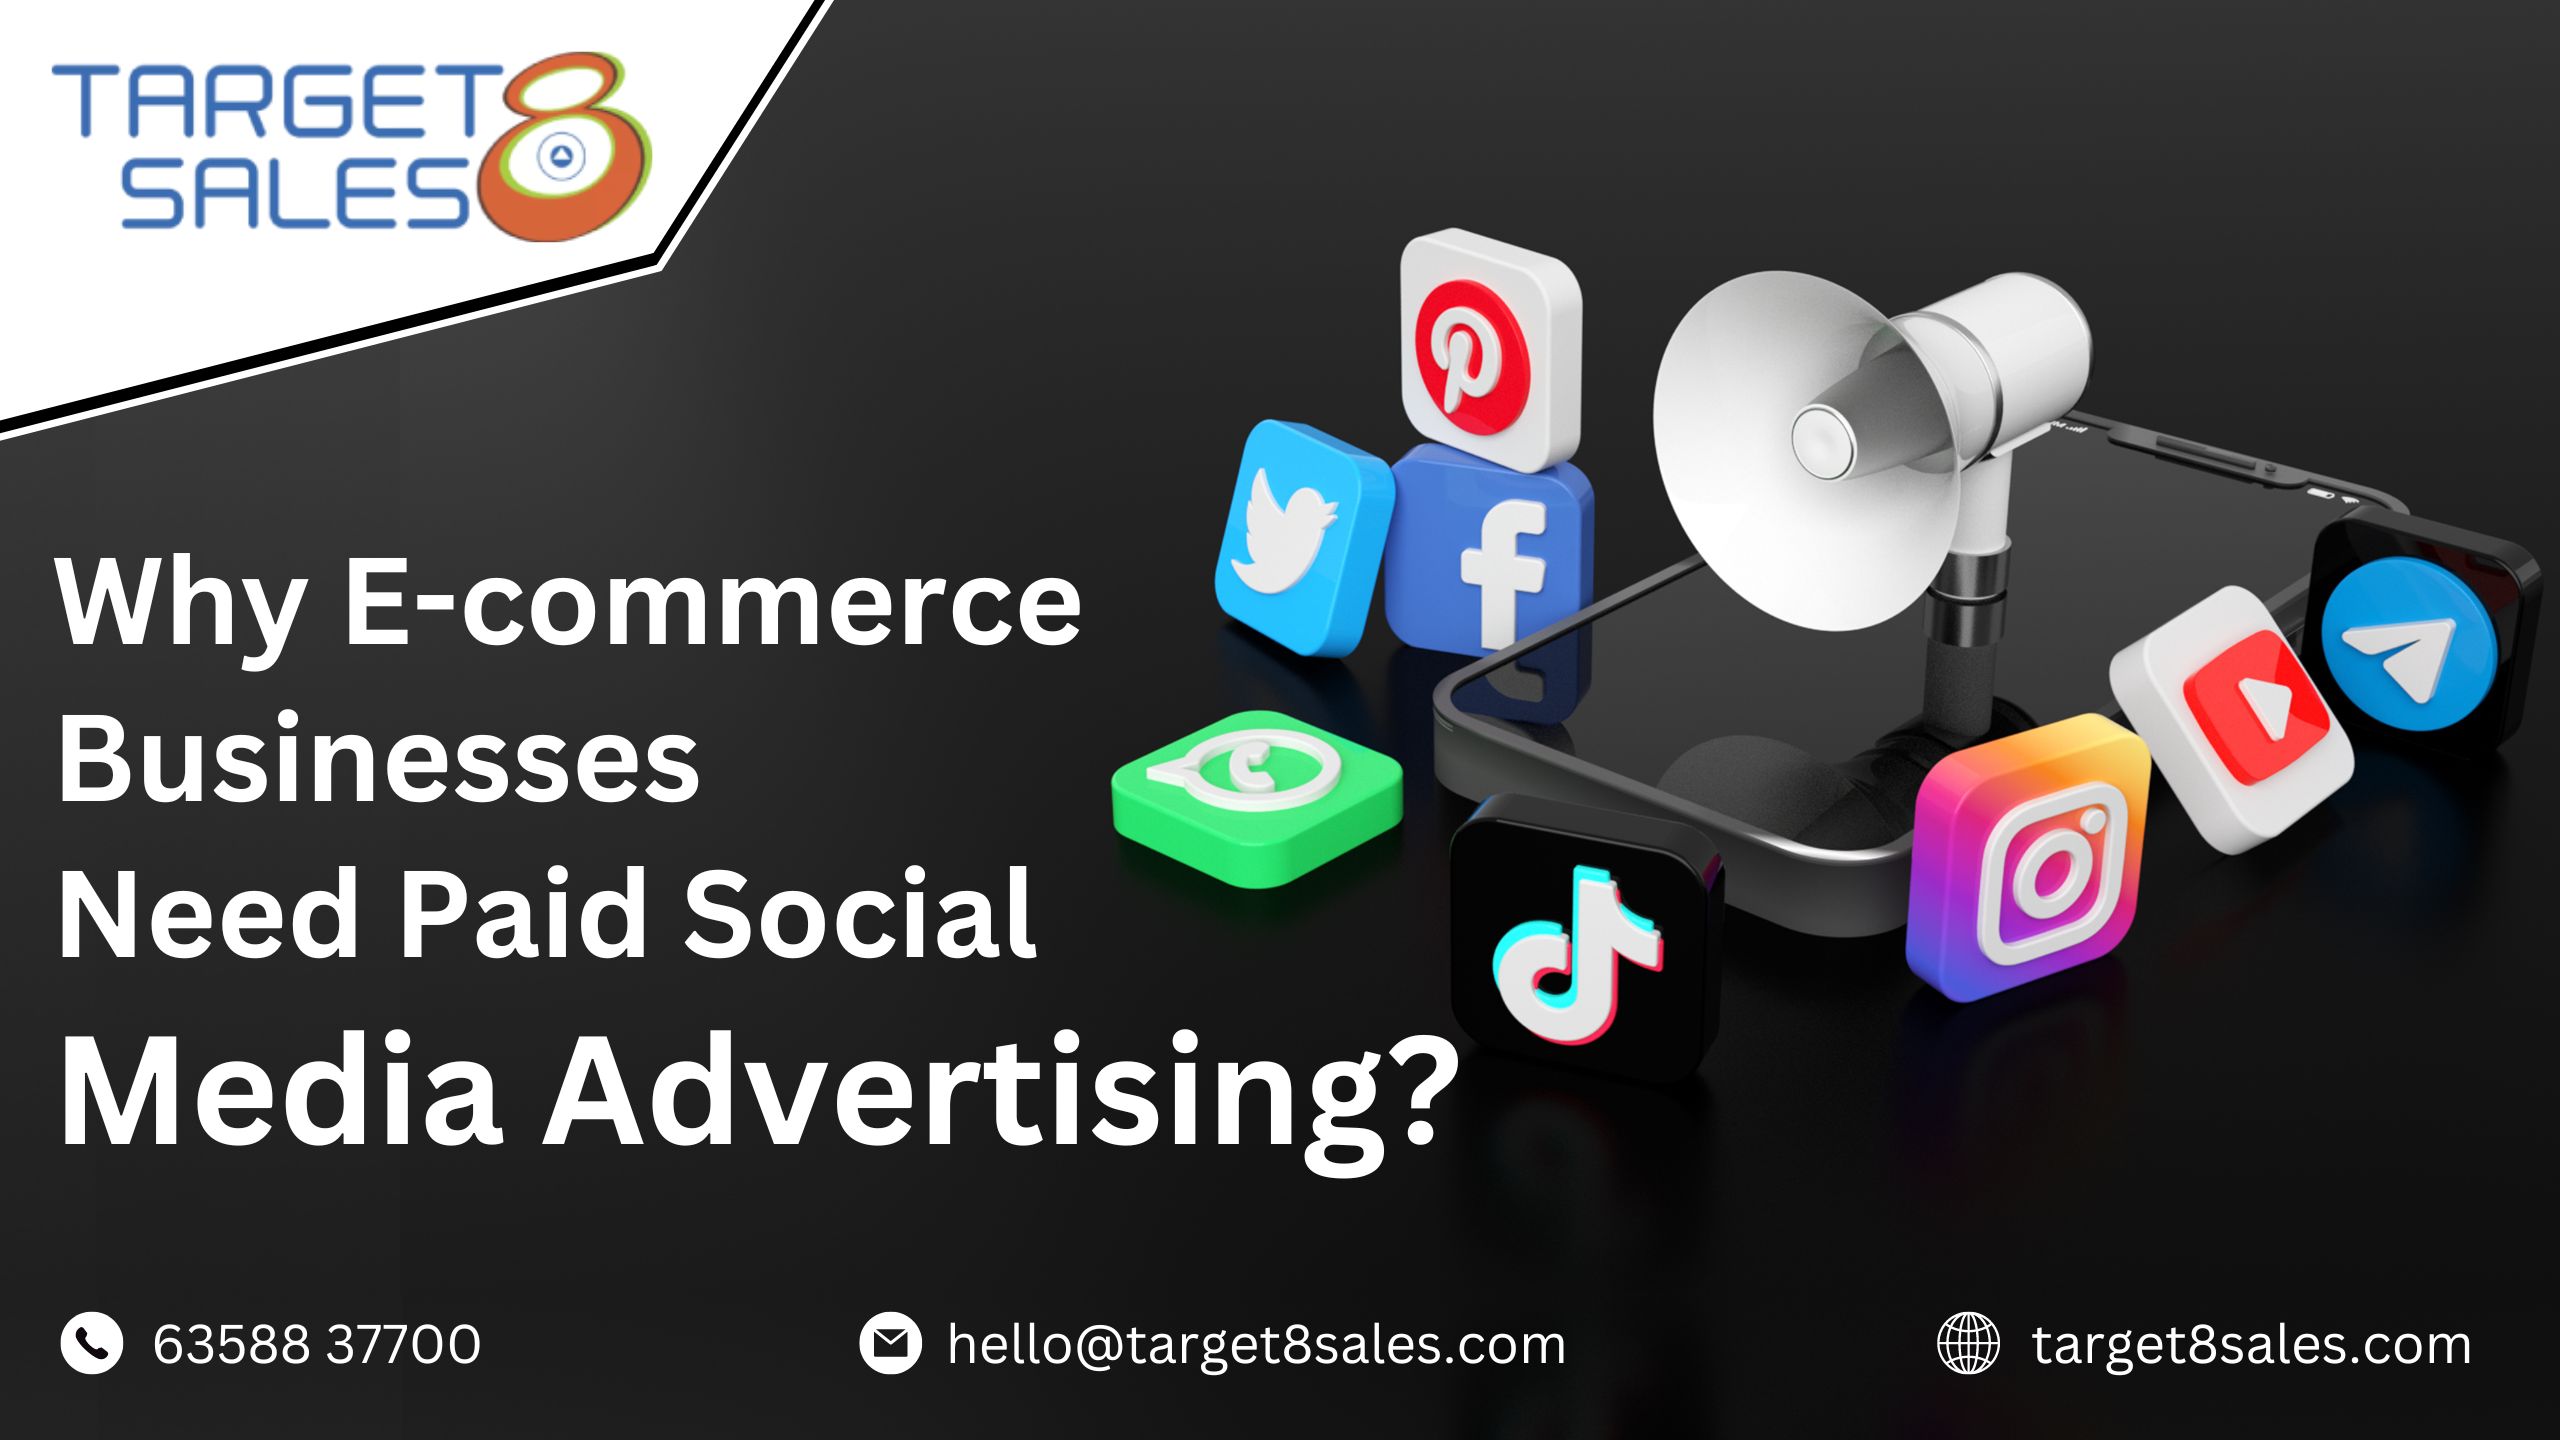 Why E-commerce Businesses Need Paid Social Media Advertising